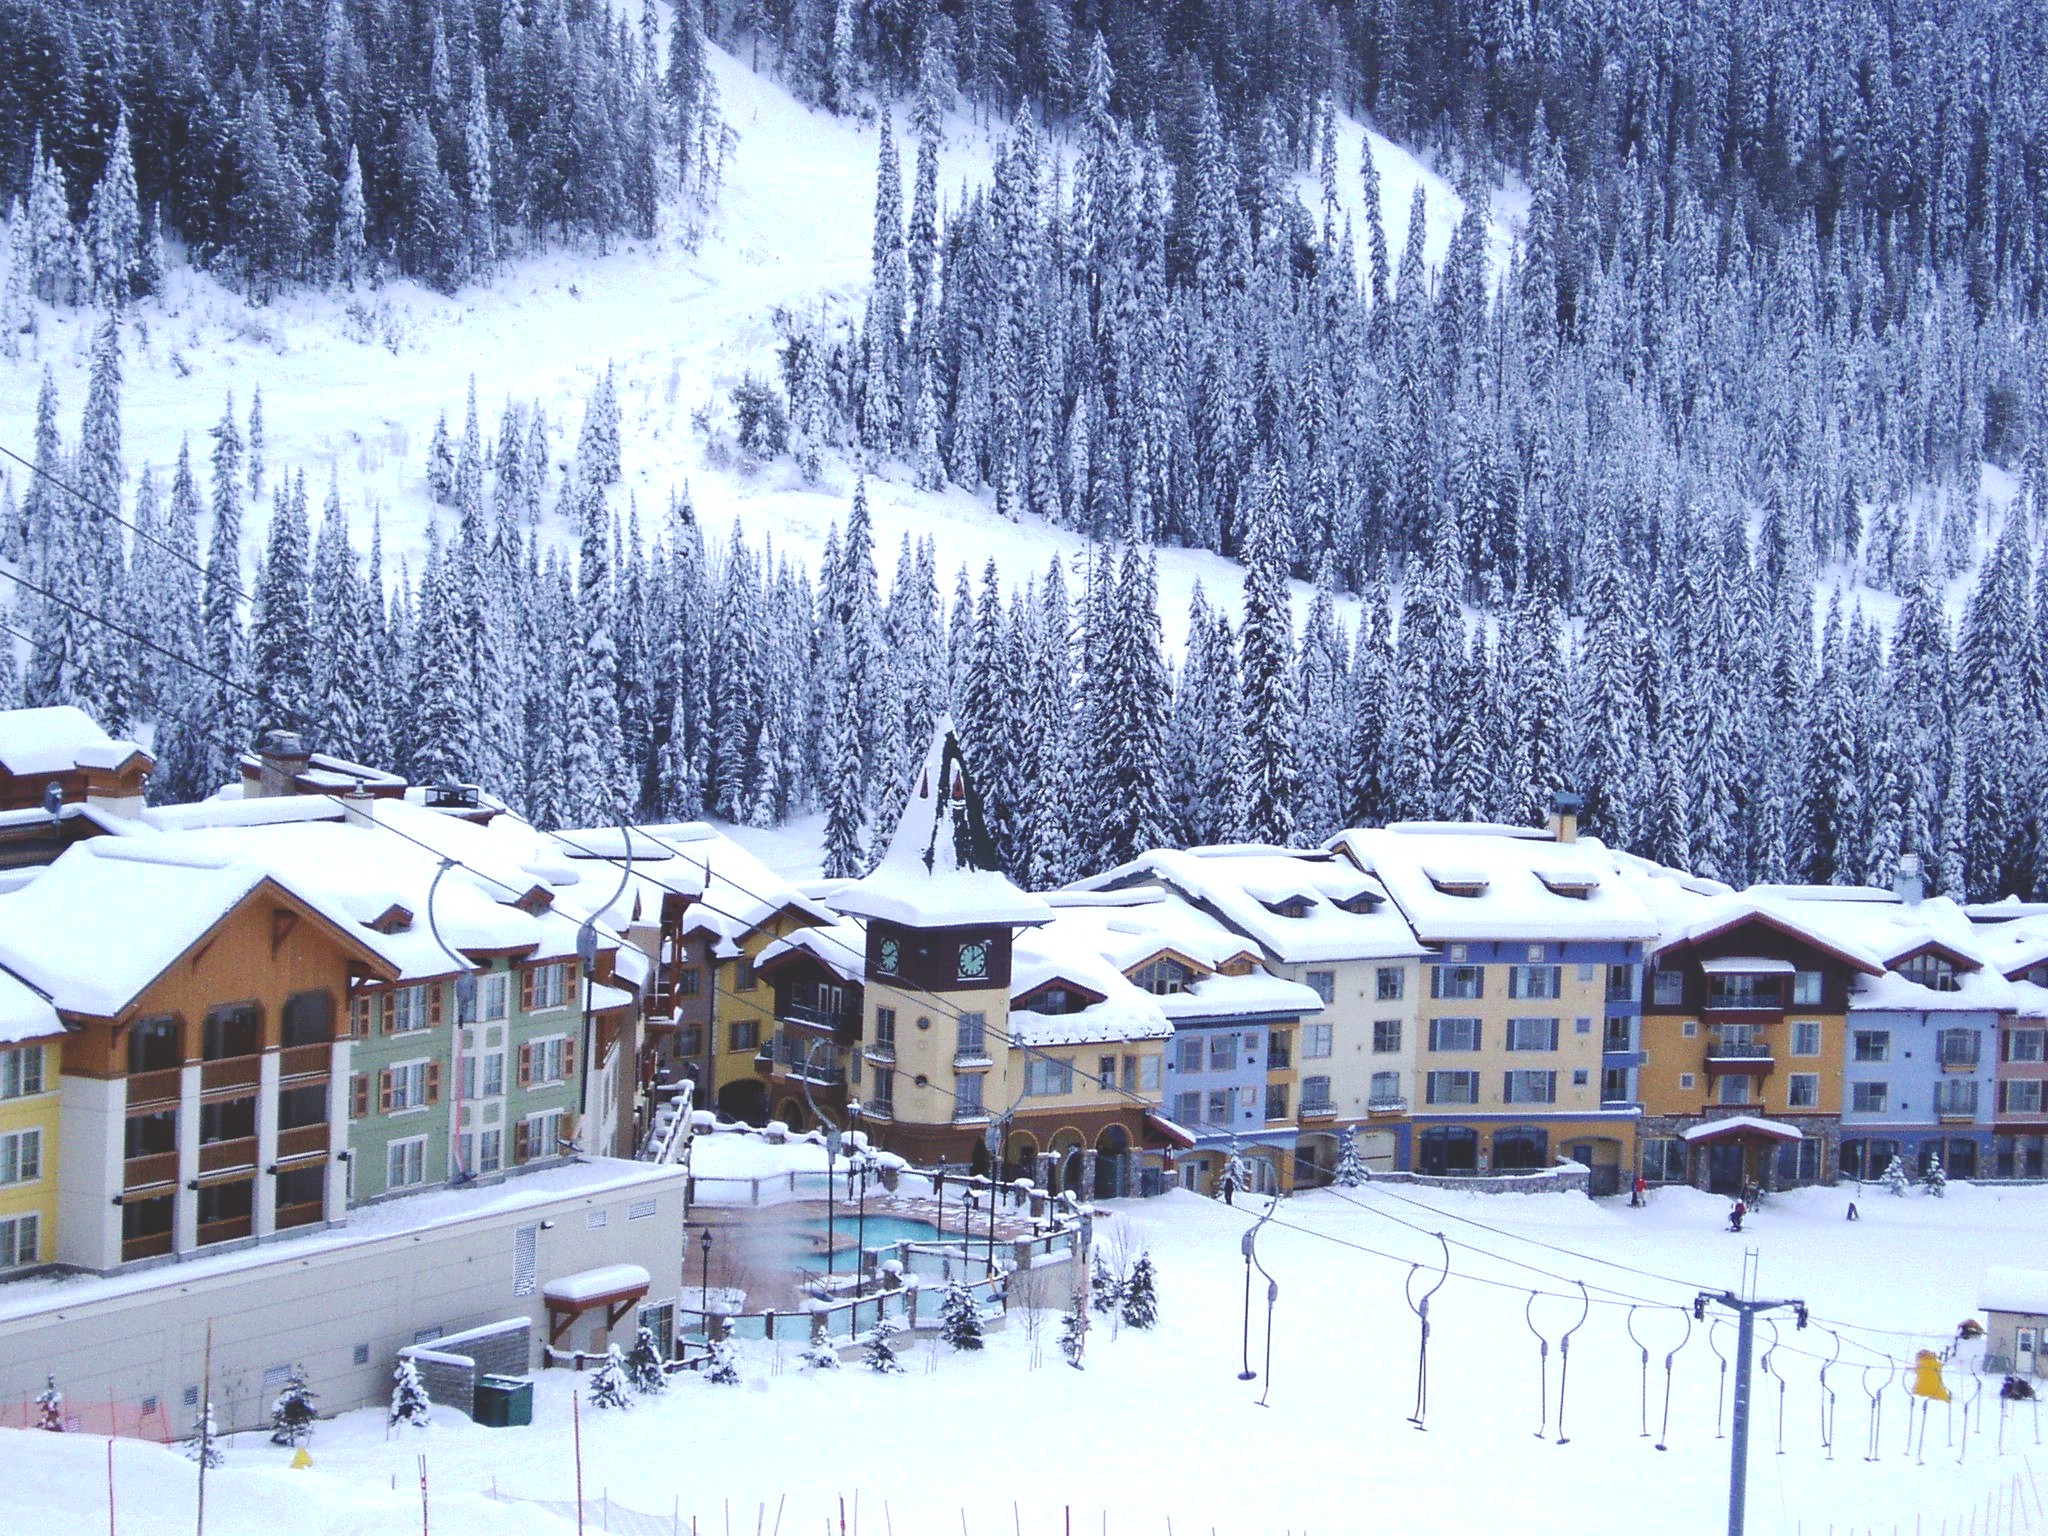 A large hotel at the bottom of a ski hill in winter.